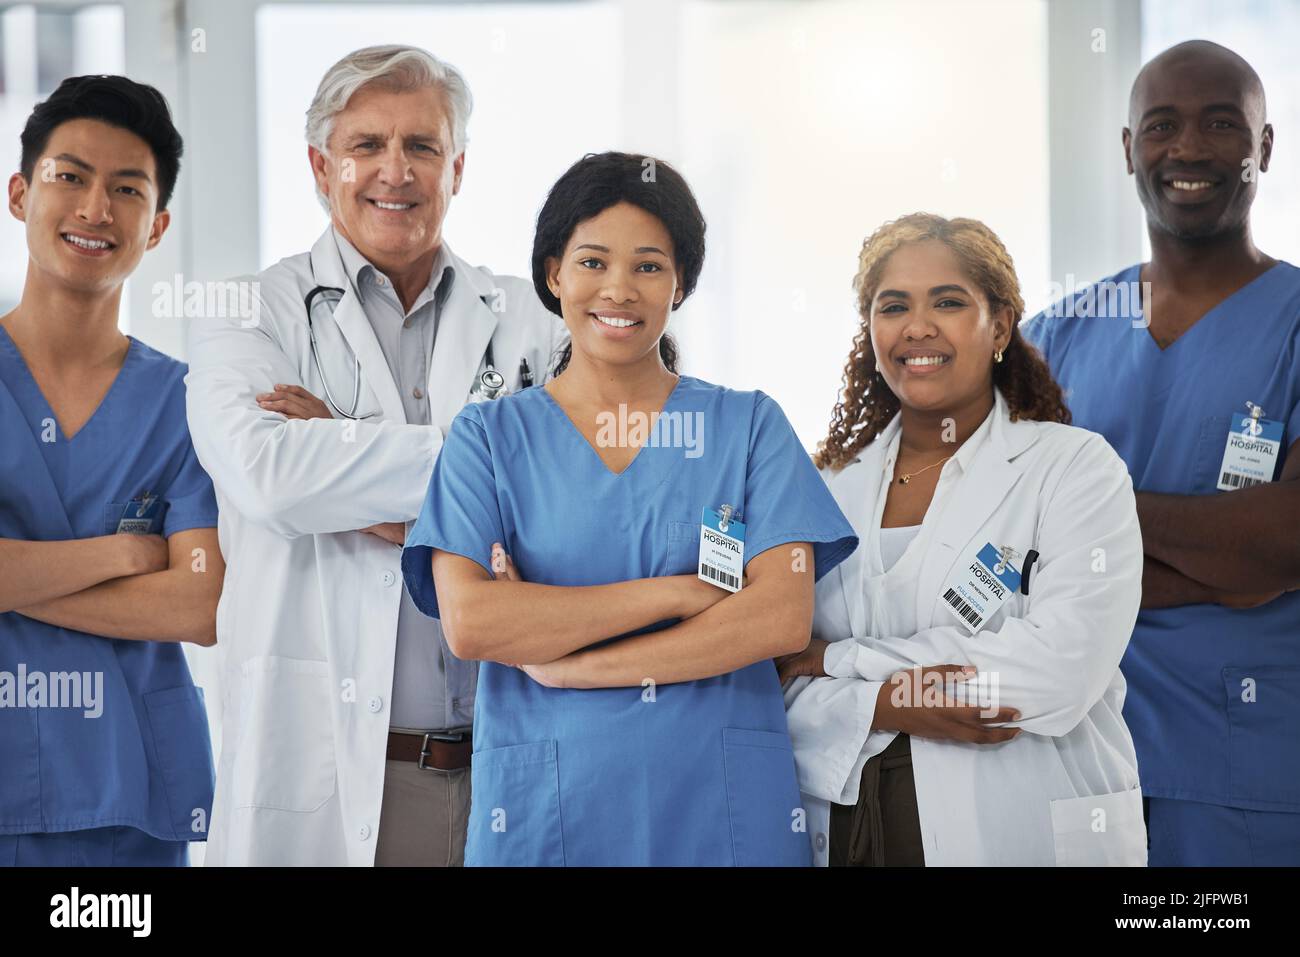 Merging their expertise and skills to overcome complex cases. Portrait of a group of medical practitioners standing together with their arms crossed Stock Photo